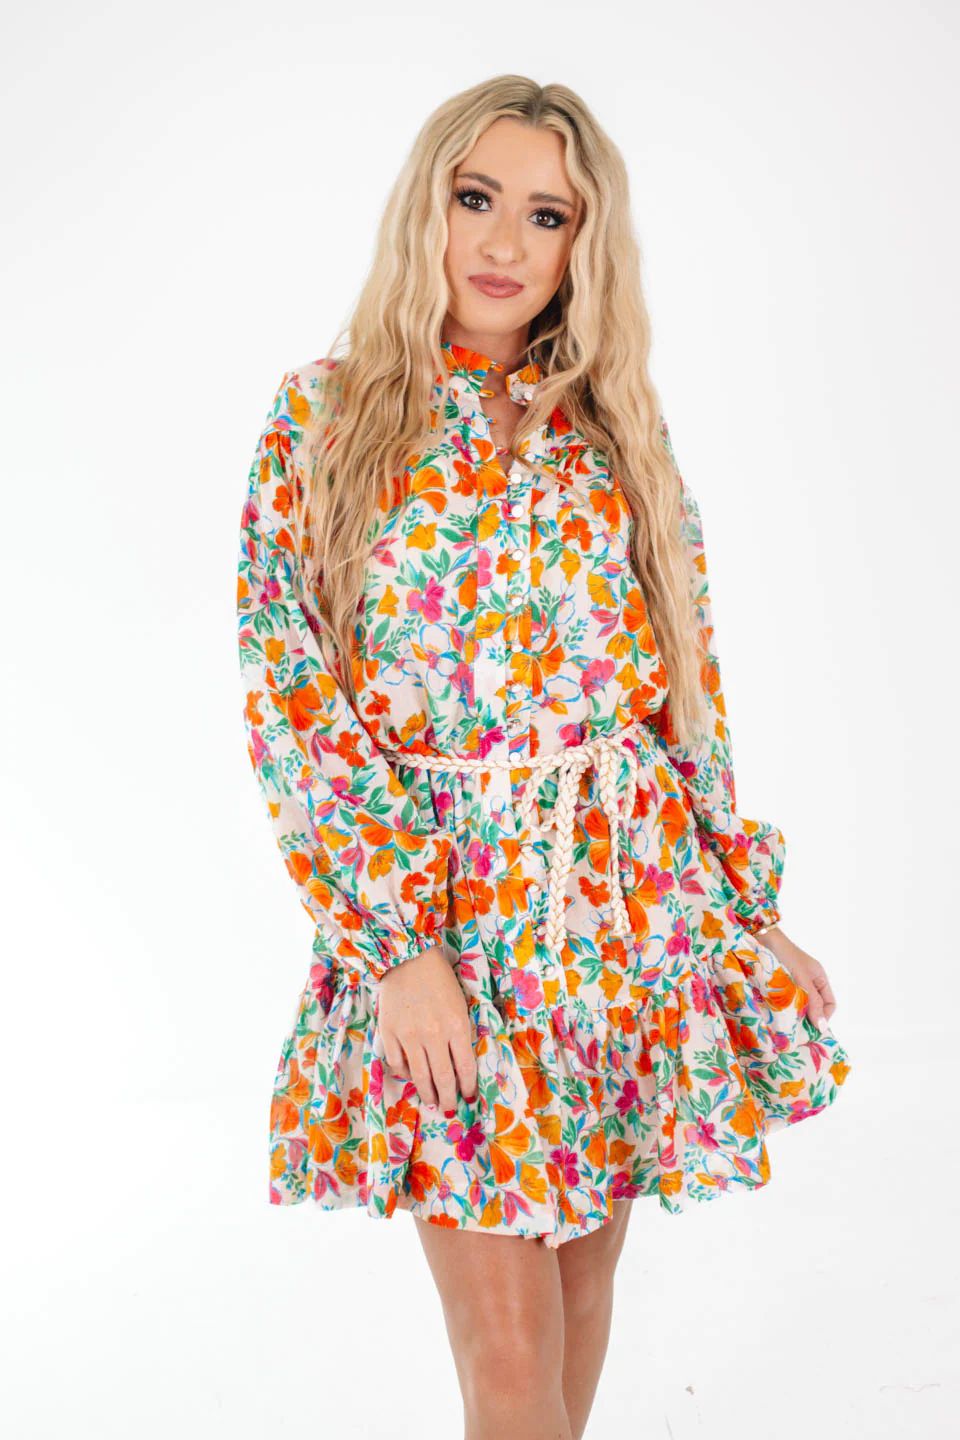 Beverly Hills Bound Dress - Multi | The Impeccable Pig